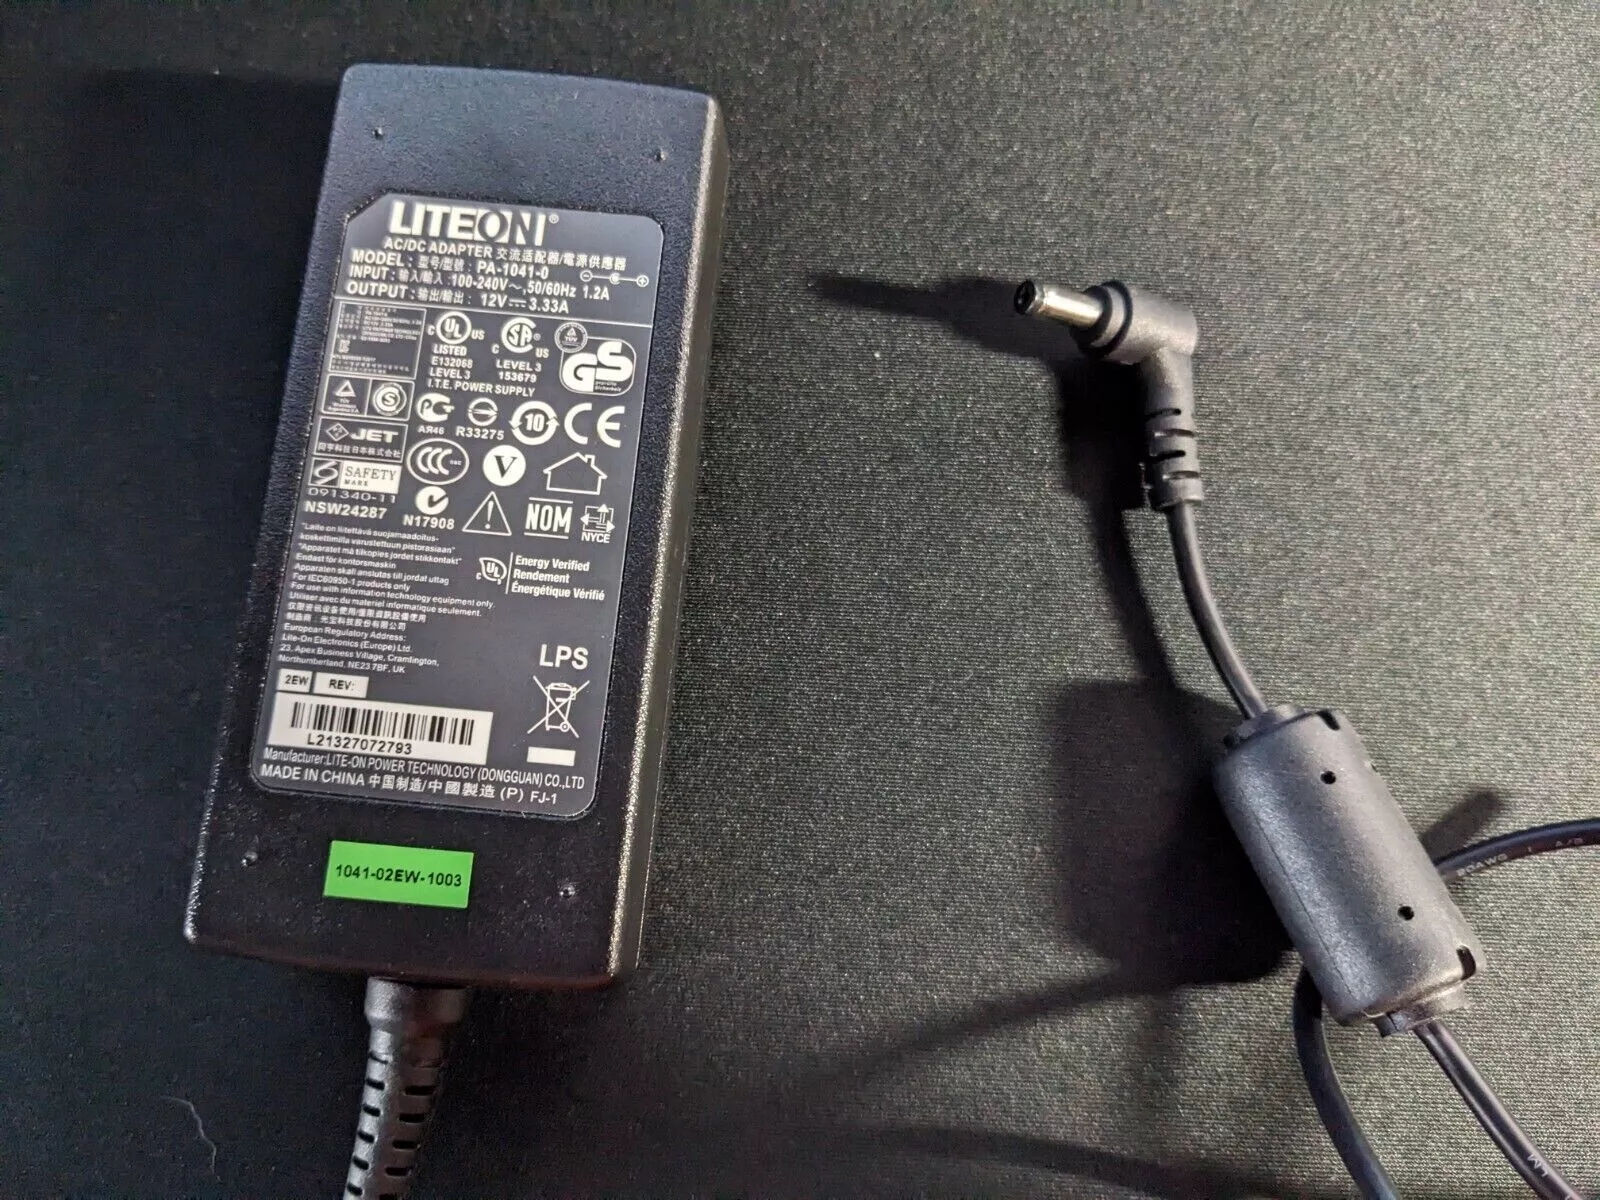 *Brand NEW*Genuine Liteon PA-1041-0 12V 3.33A AC Adapter Charger Power Supply